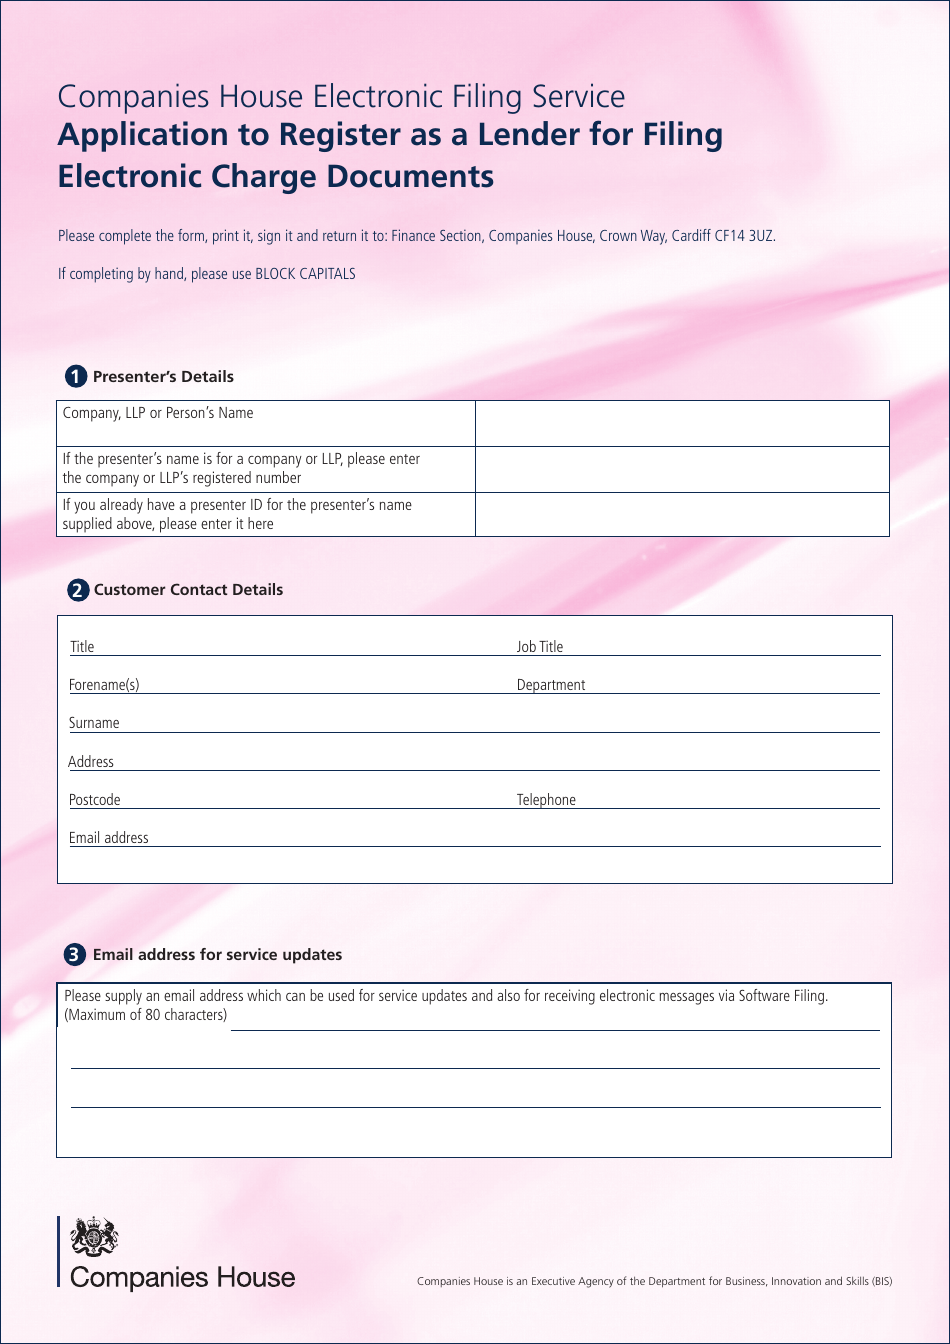 Application to Register as a Lender for Filing Electronic Charge Documents - United Kingdom, Page 1